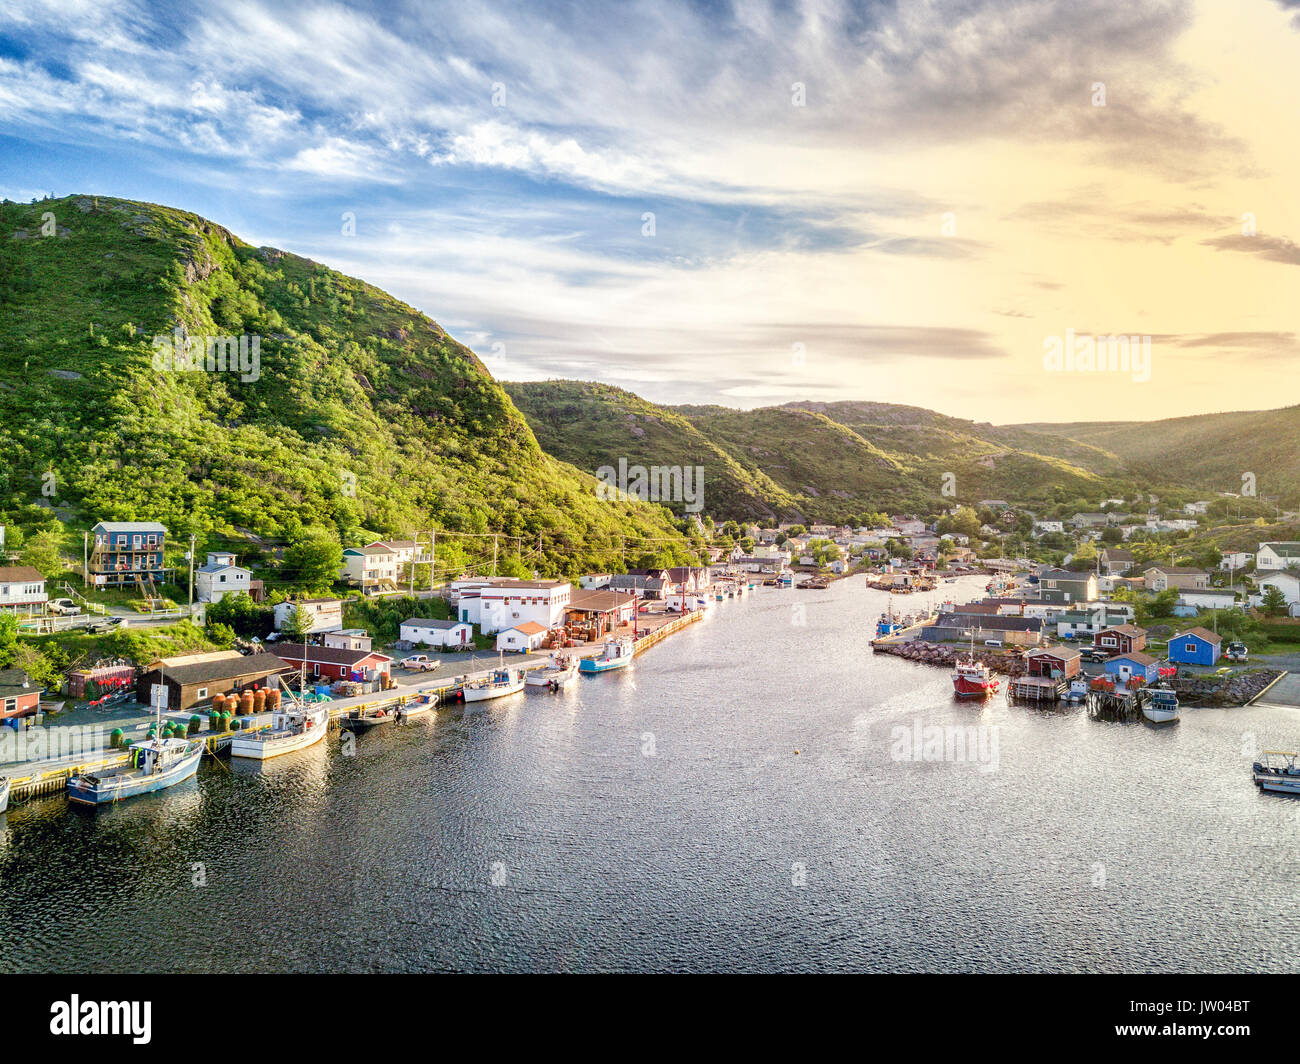 Charming Petty Harbour with green hills and colorful wooden architecture, Newfoundland, Canada Stock Photo